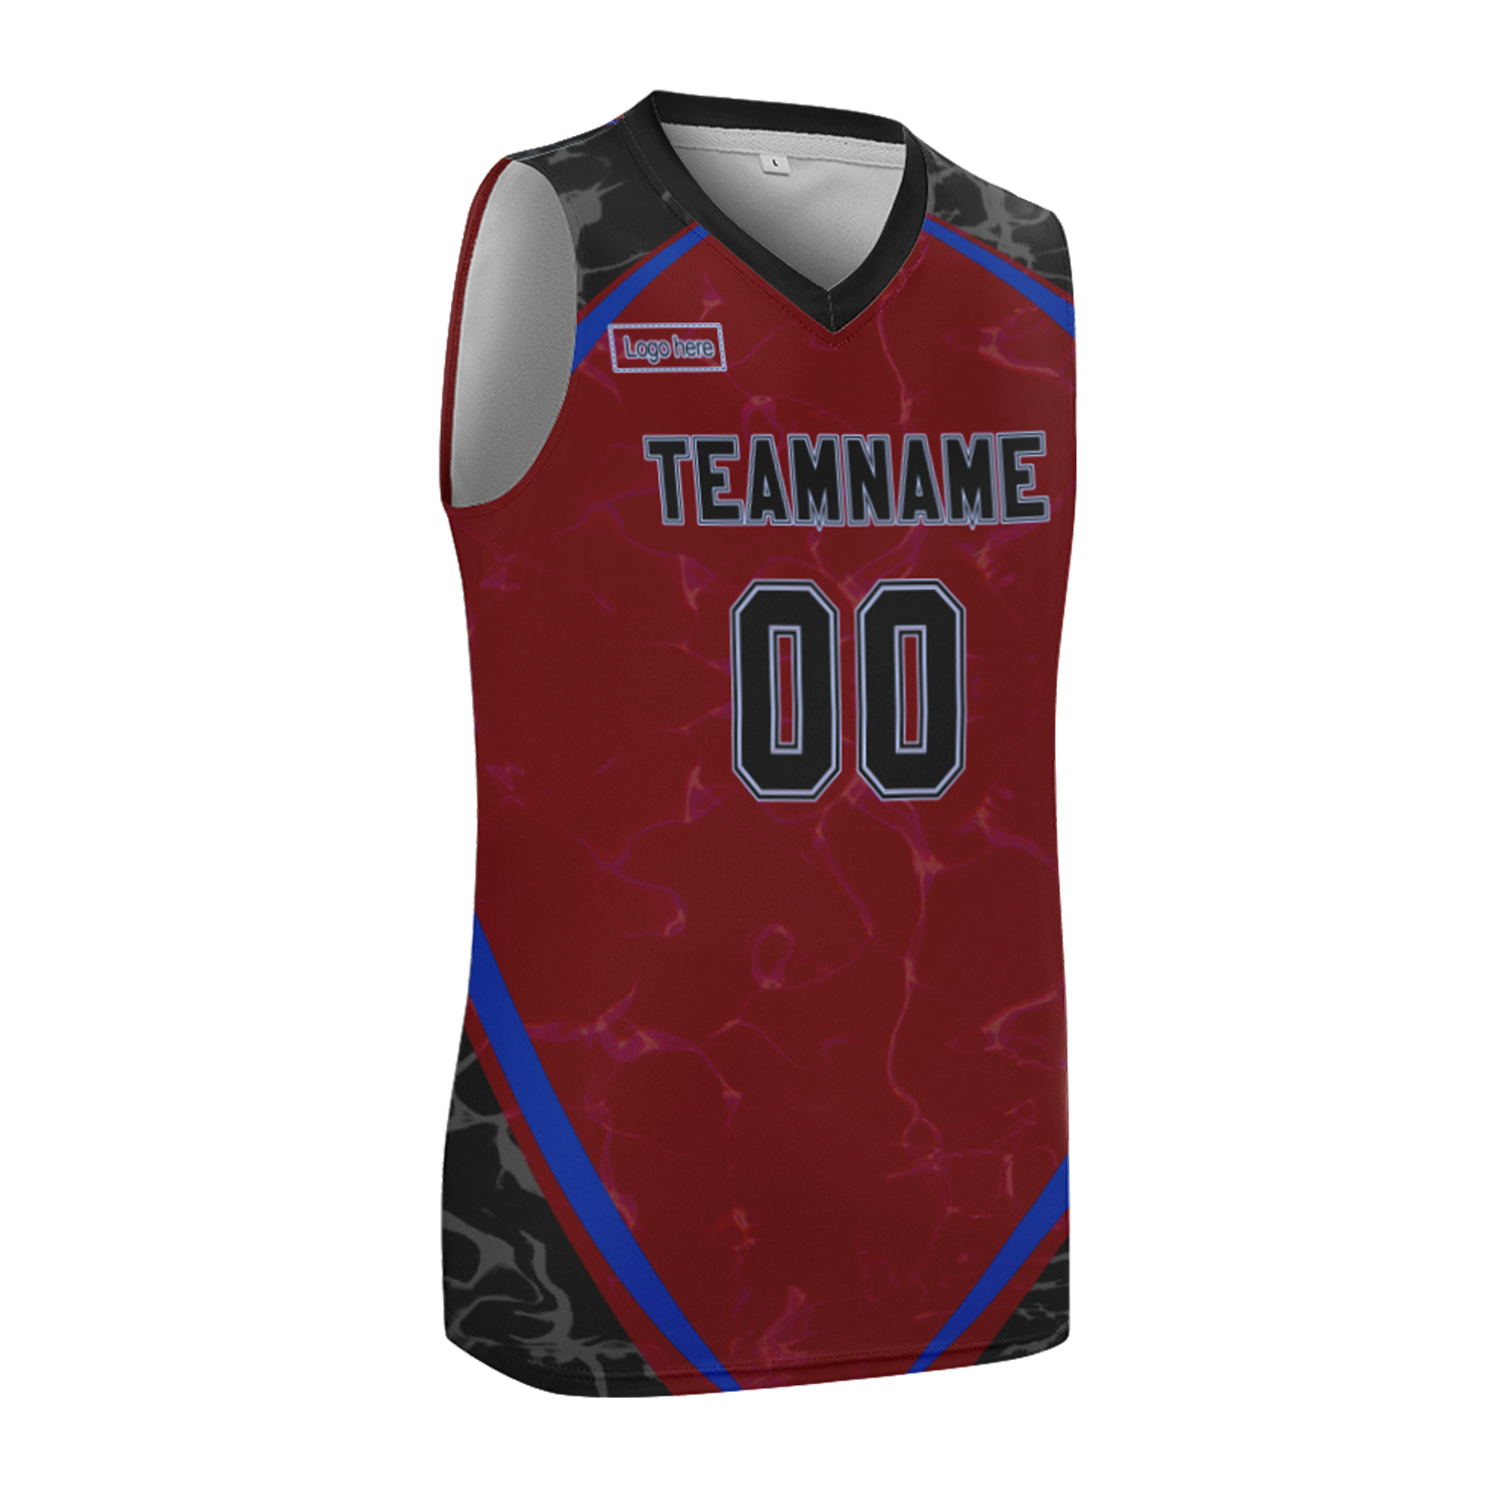 custom-basketball-jersey-personalized-printed-design-sports-basketball-uniforms-wholesale-team-basketball-suits-6